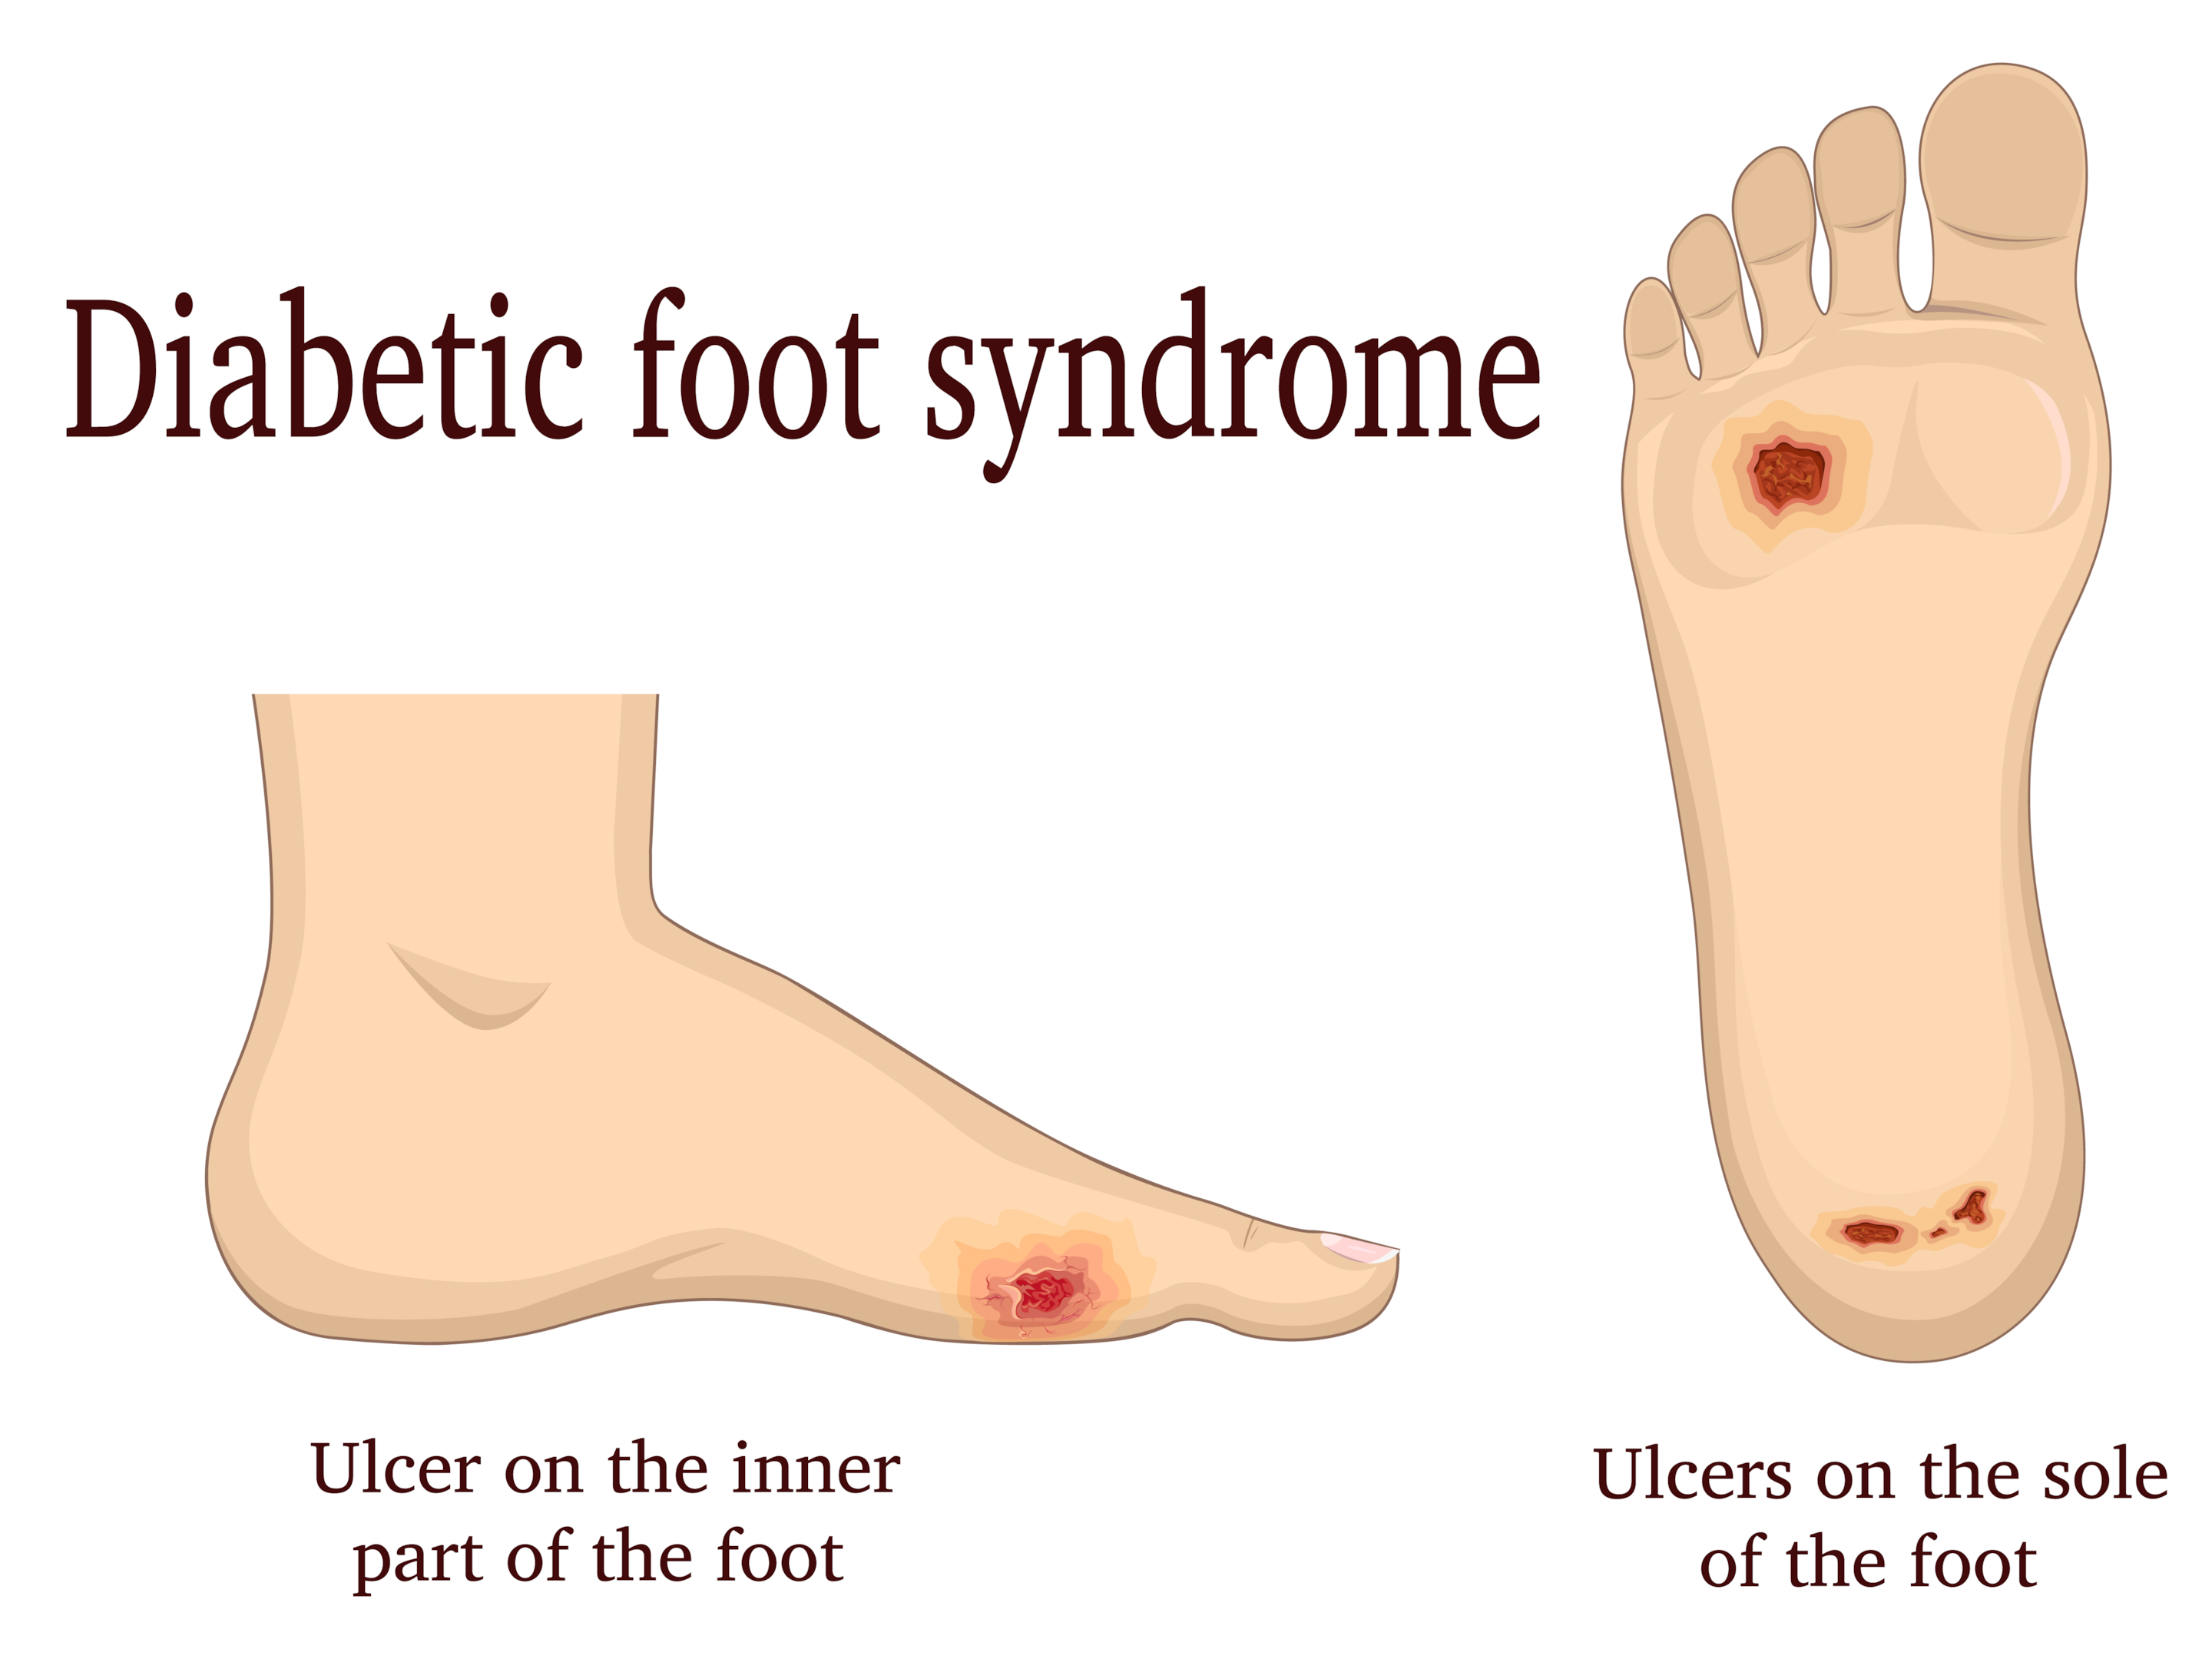 diabetes affects foot temperature and can lead to ulcers